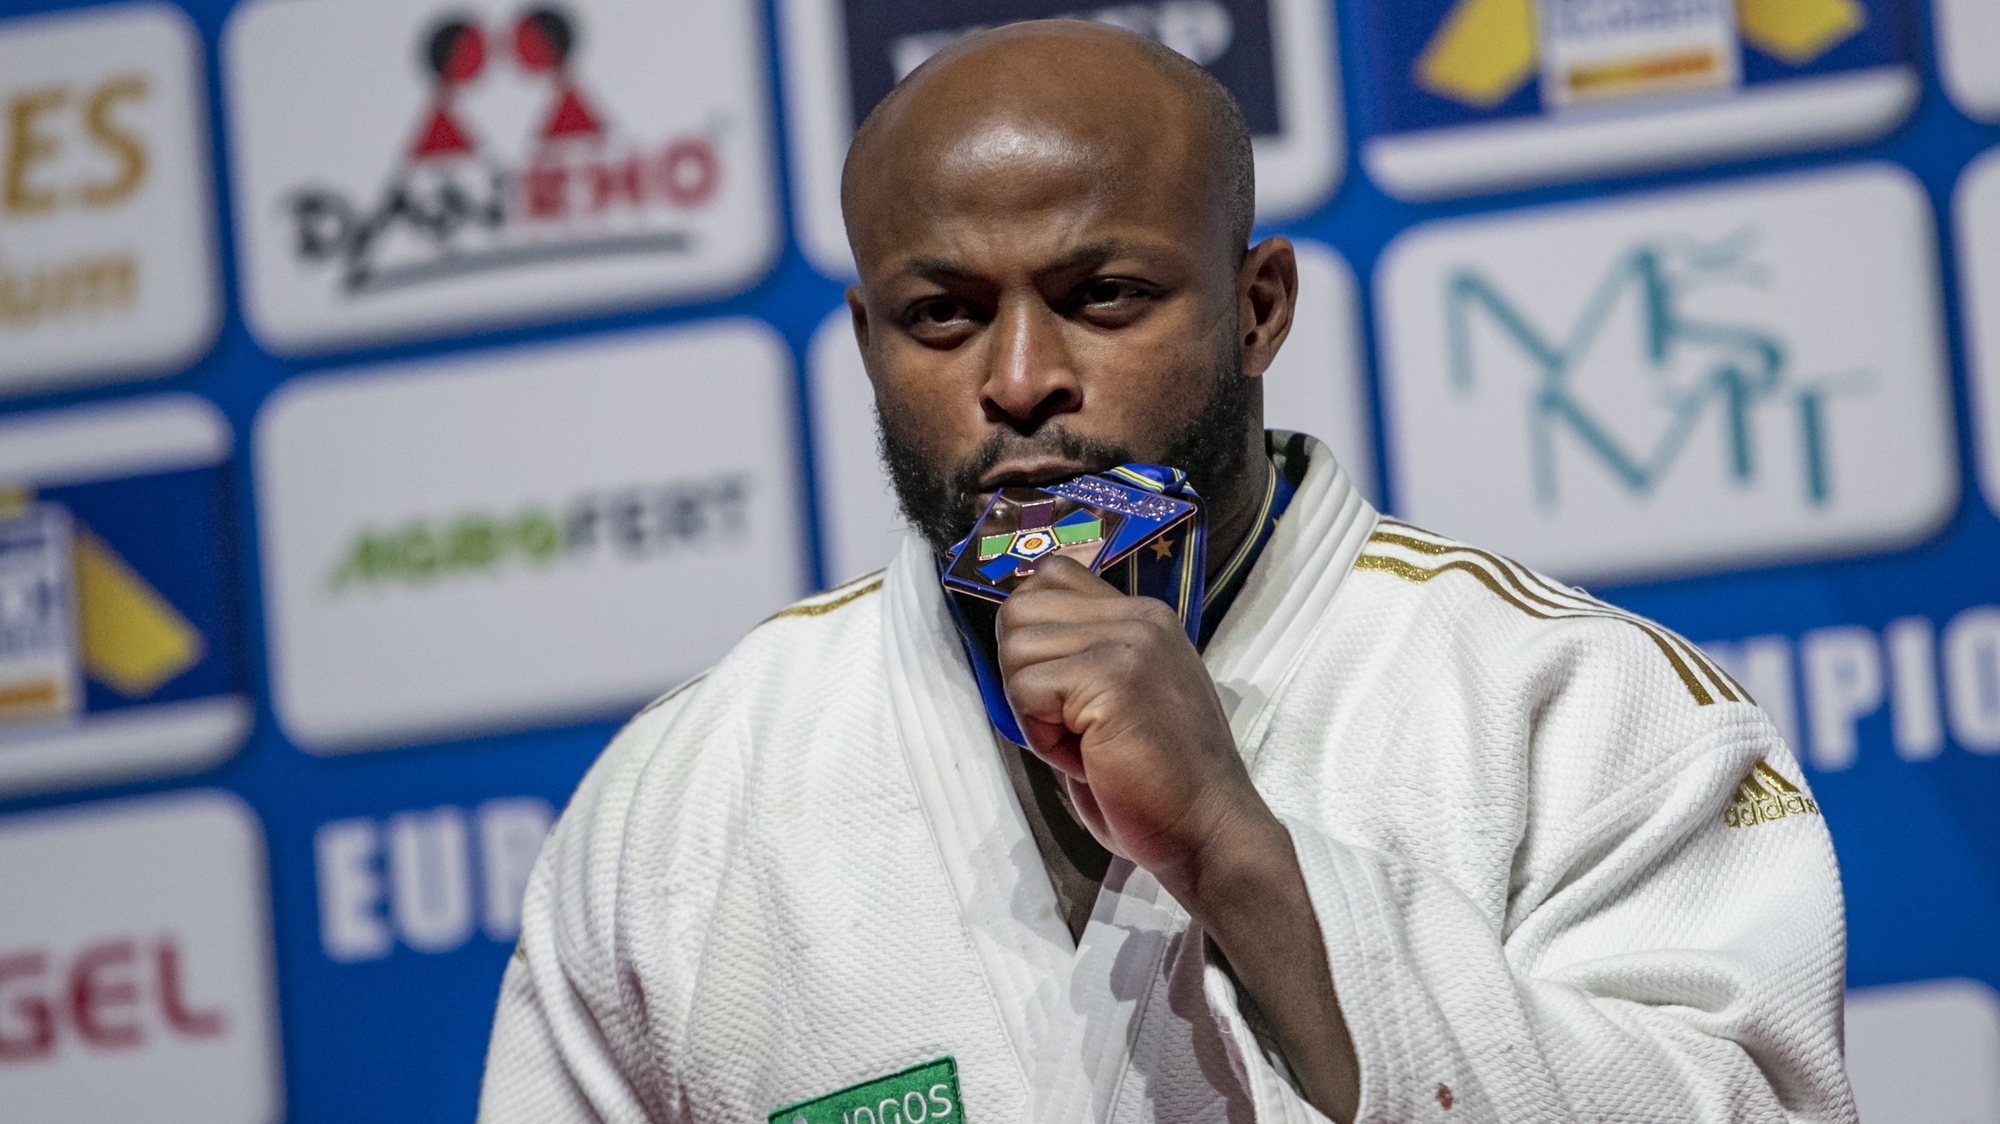 epa08834315 Third placed Jorge Fonseca of Portugal poses on podium after bronze medal bout in the men&#039;s -100kg category at the European Judo Championships in Prague, Czech Republic, 21 November 2020.  EPA/MARTIN DIVISEK